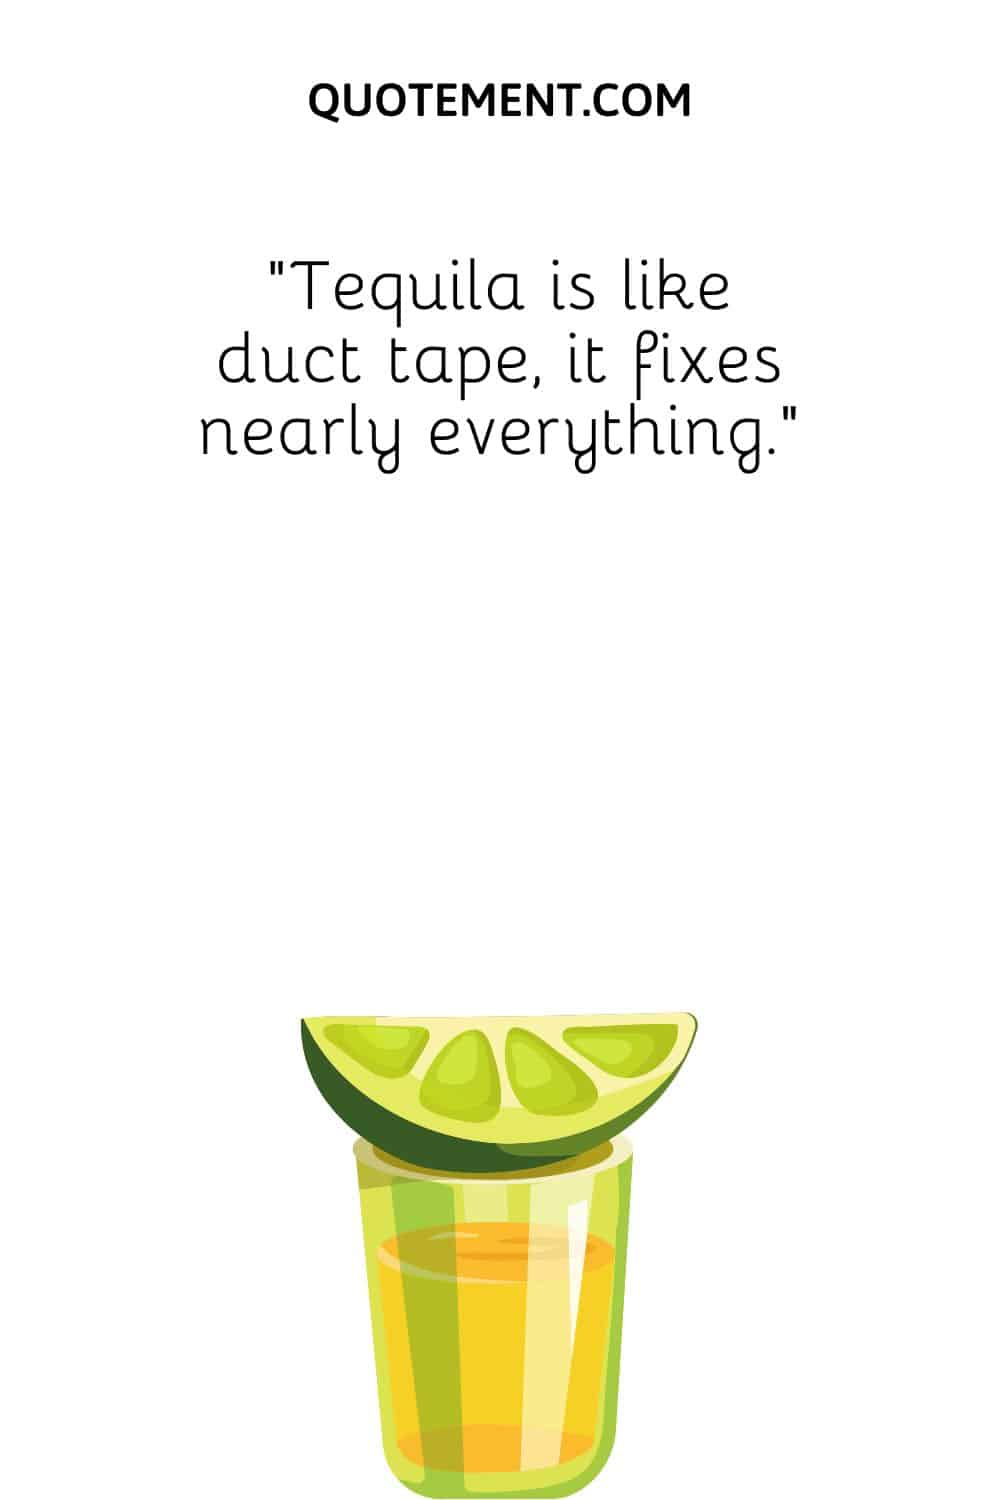 Tequila is like duct tape